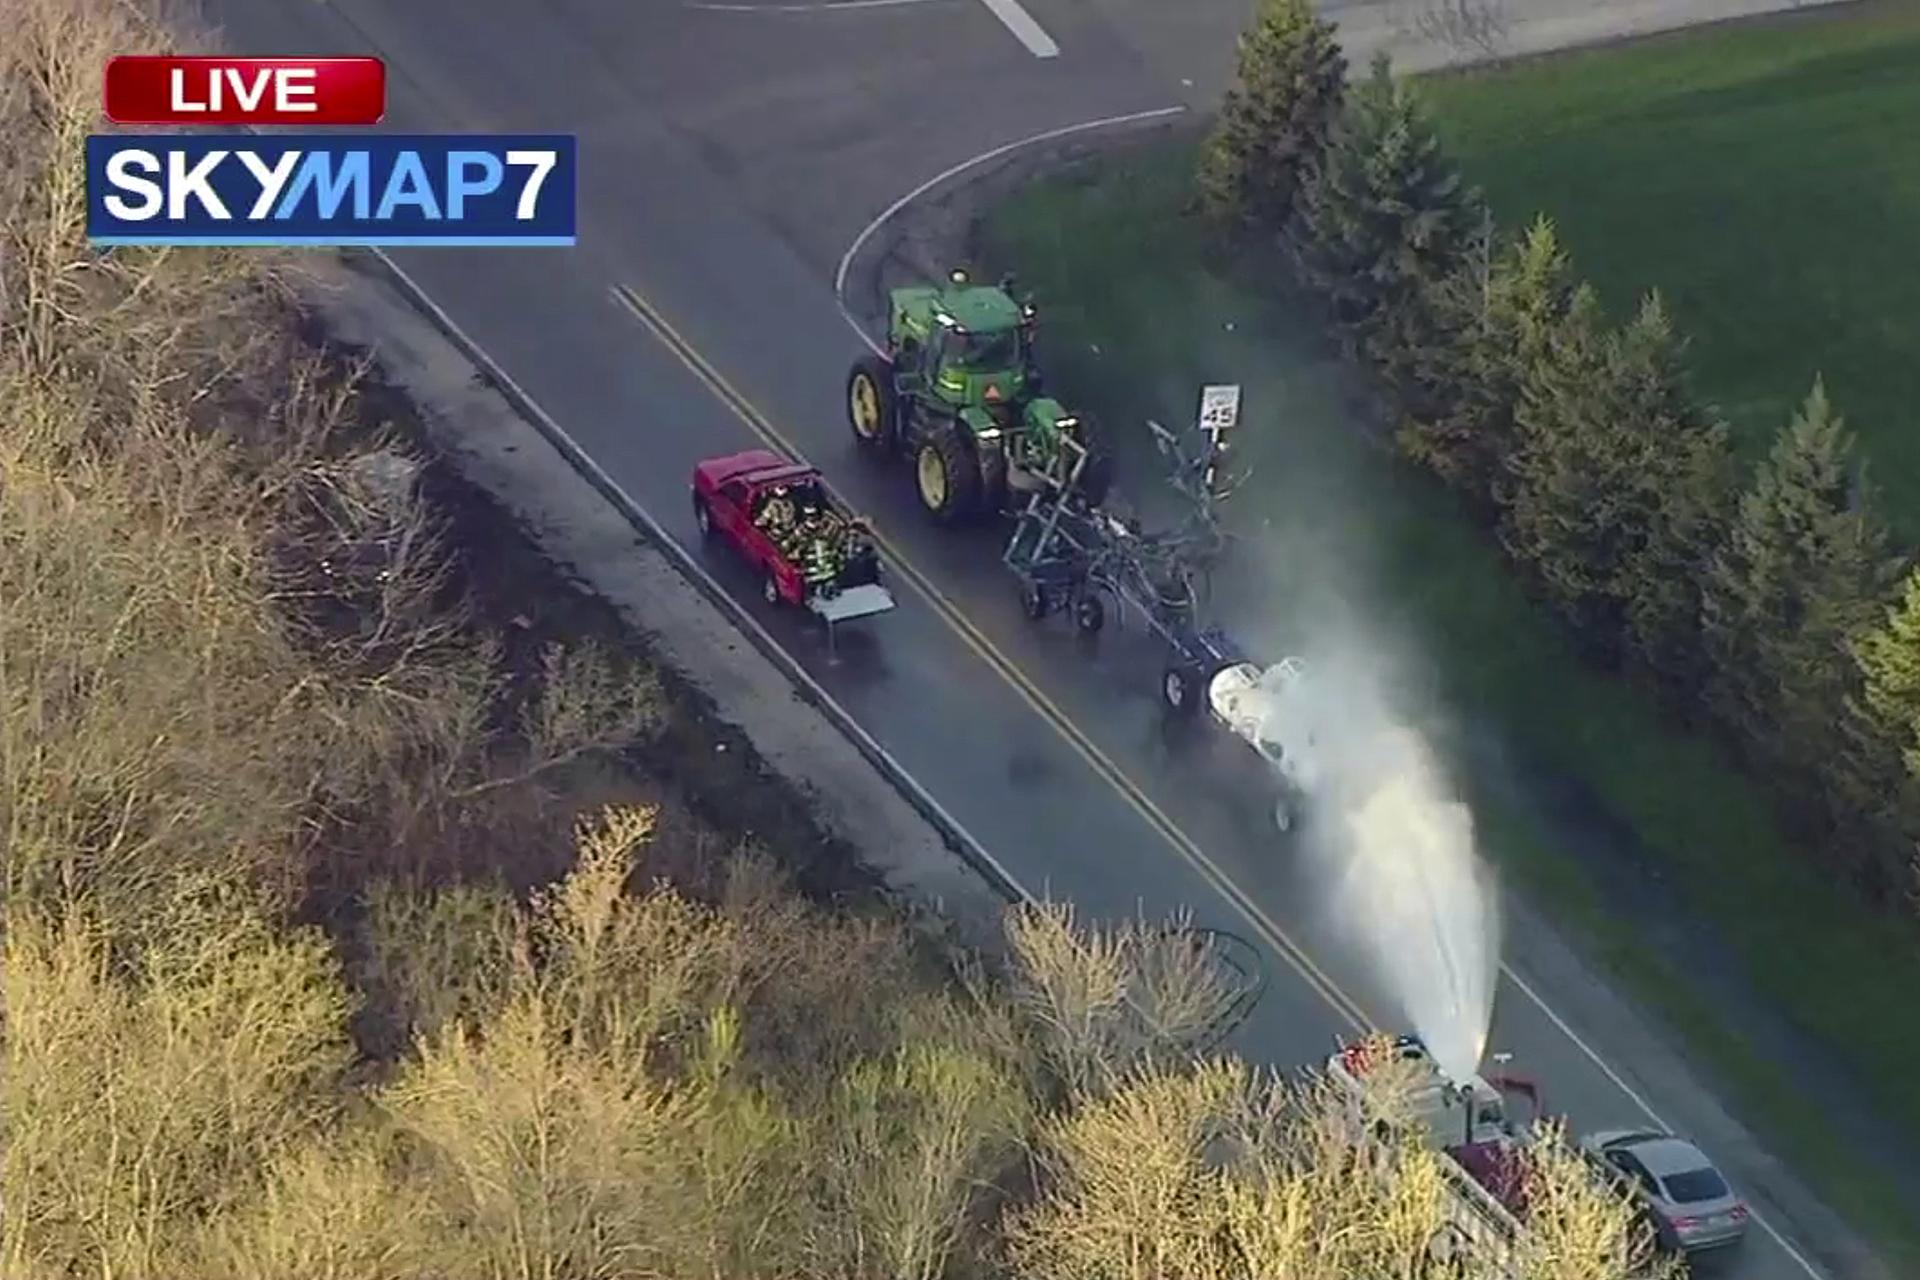 In this still image from video provided by ABC7 Chicago, a fire engine sprays water on a container of the chemical that farmers use for soil after anhydrous ammonia leaked Thursday, April 25, 2019, in Beach Park, Illinois. (ABC7 Chicago via AP)